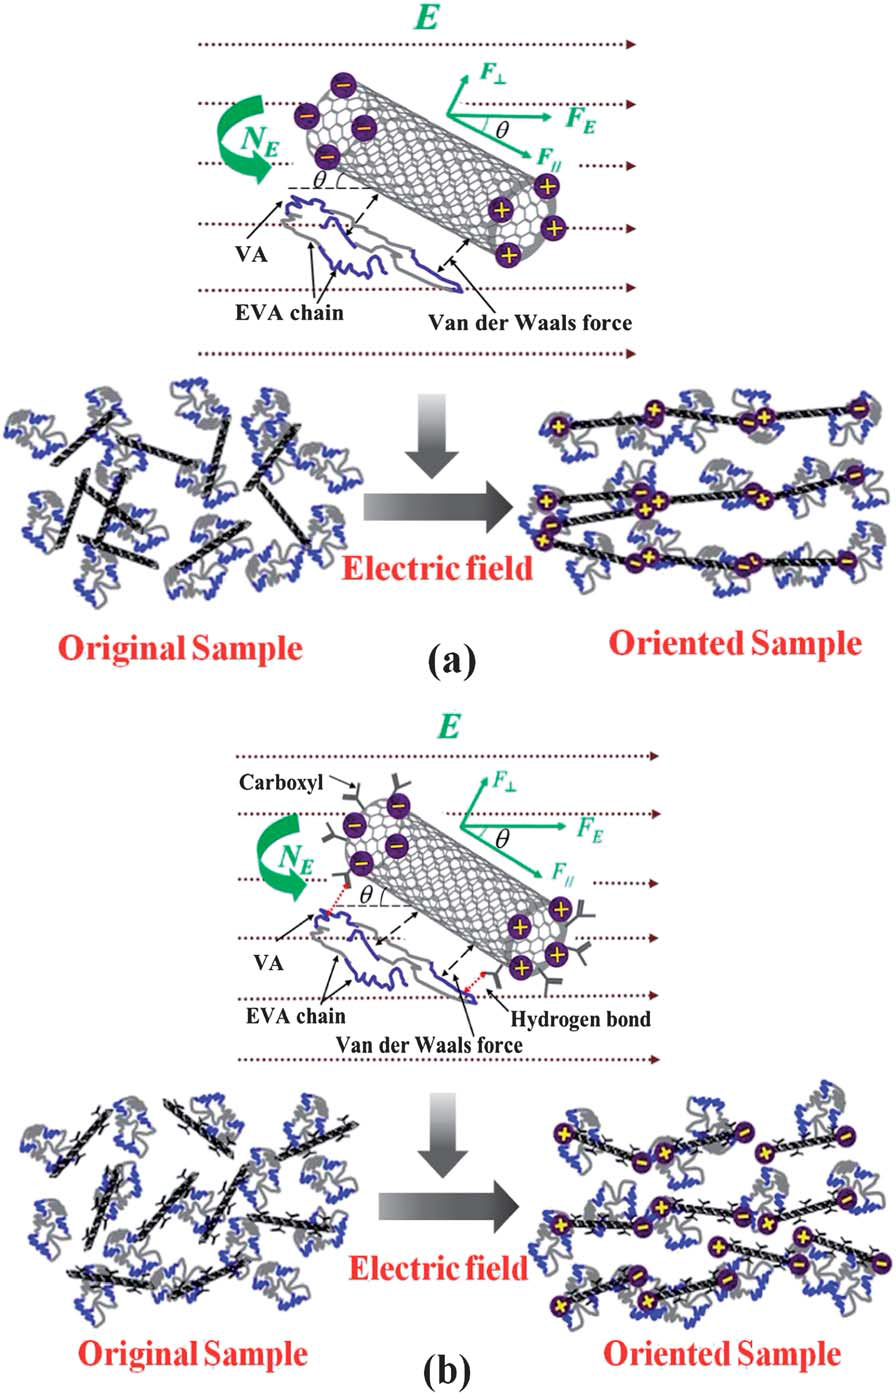 Influence of surface polarity of carbon nanotubes on electric field induced aligned conductive network formation in a polymer melt